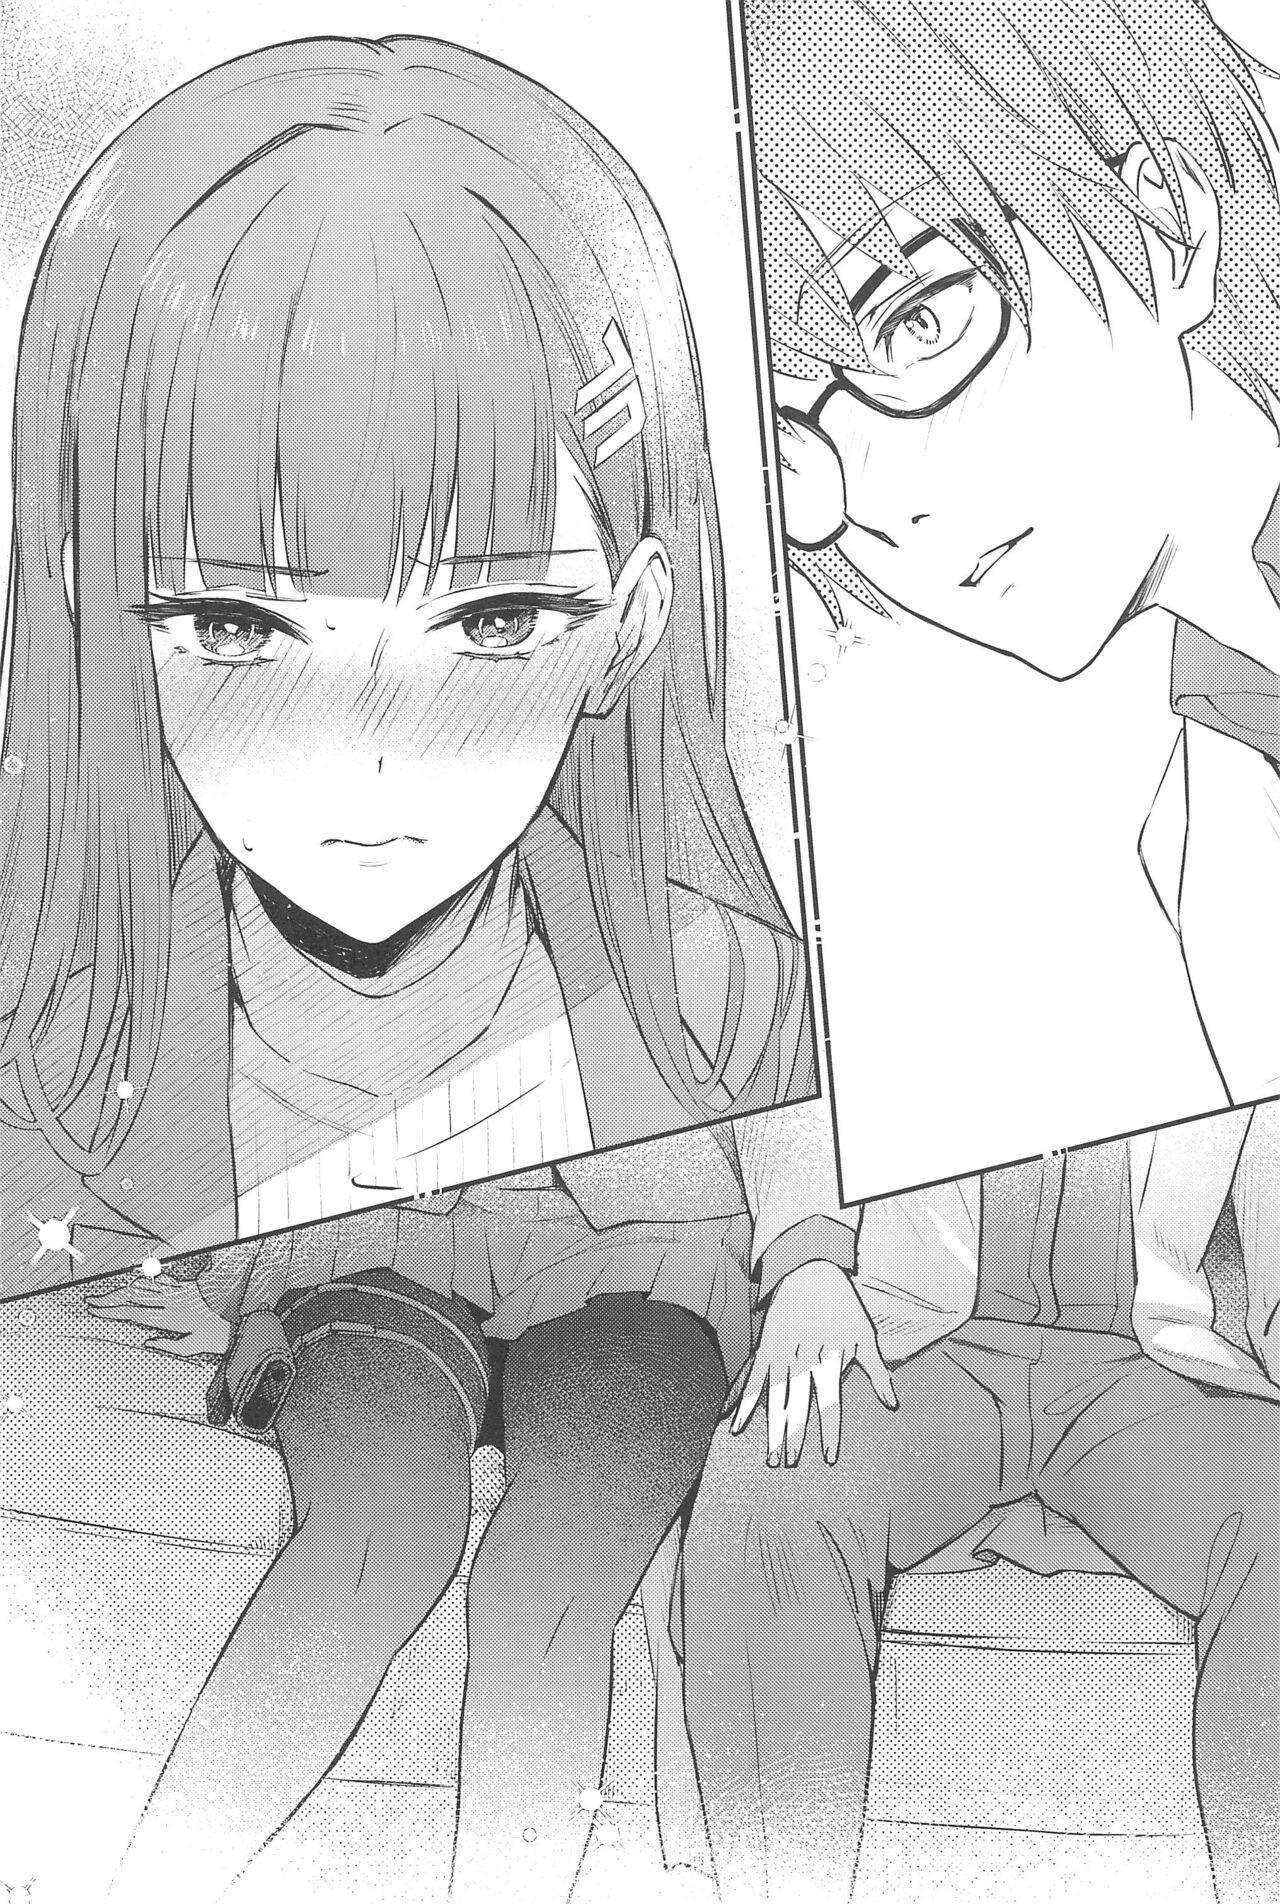 Tiny Girl (C102) [Shiro no Ie (Yochiki)] Rio-chan wa Otosaretai. - Rio Want To Be Fall in Love (Blue Archive) - Blue archive Gay Trimmed - Page 6